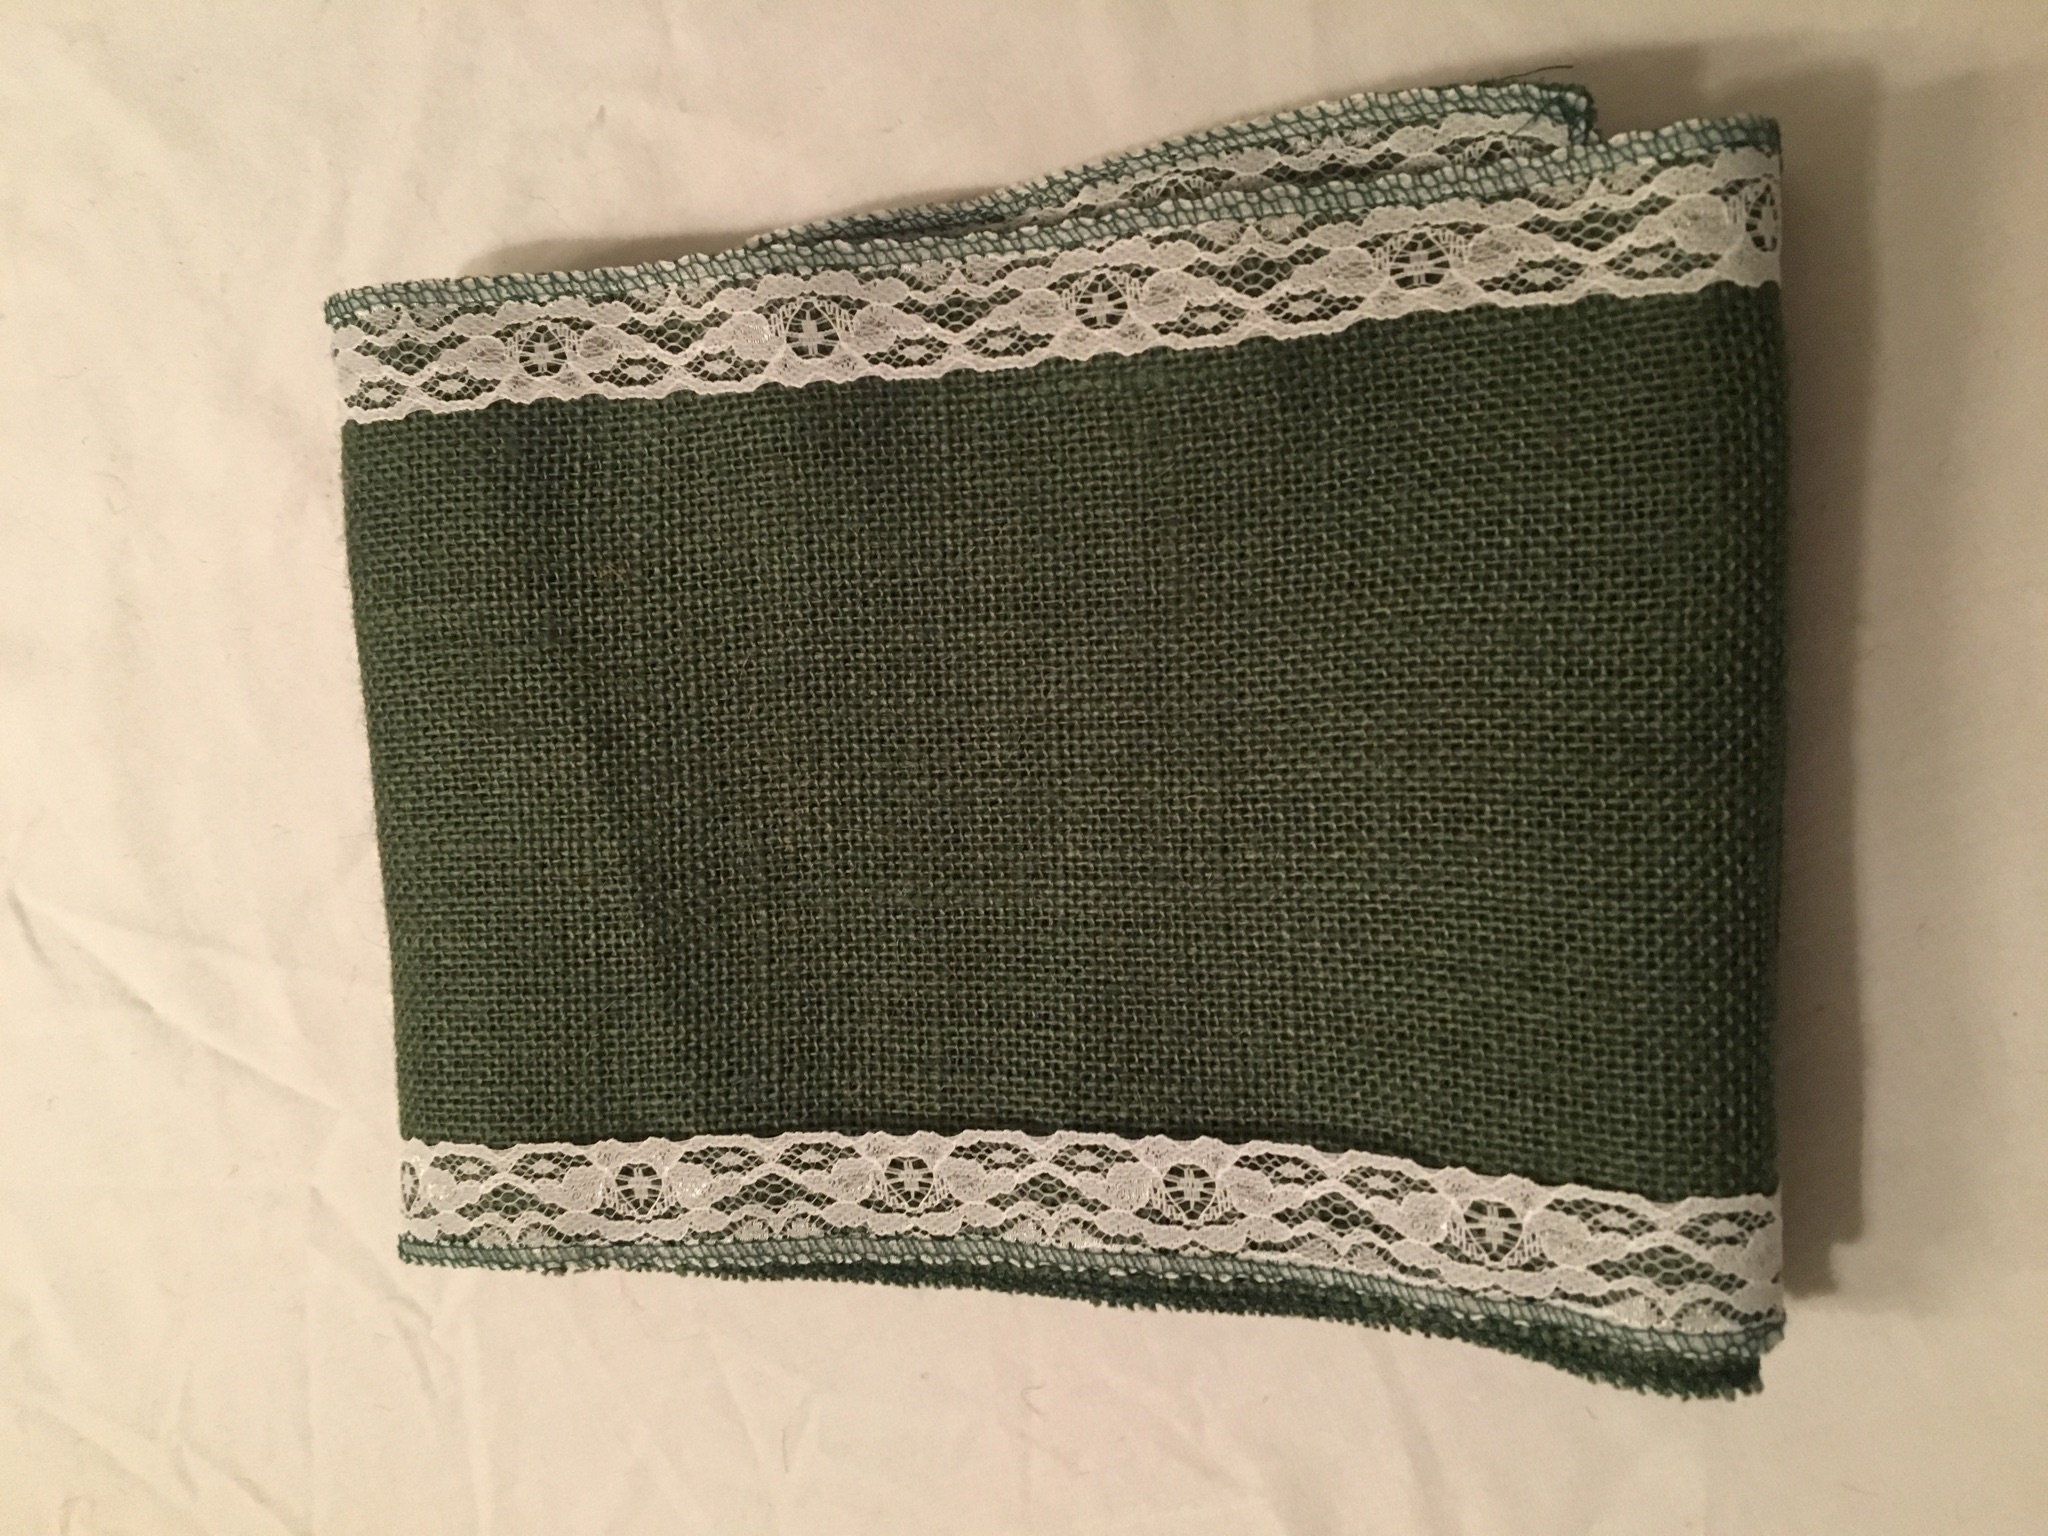 7" Green Burlap Ribbon with White Floral Lace - 6 Foot Length